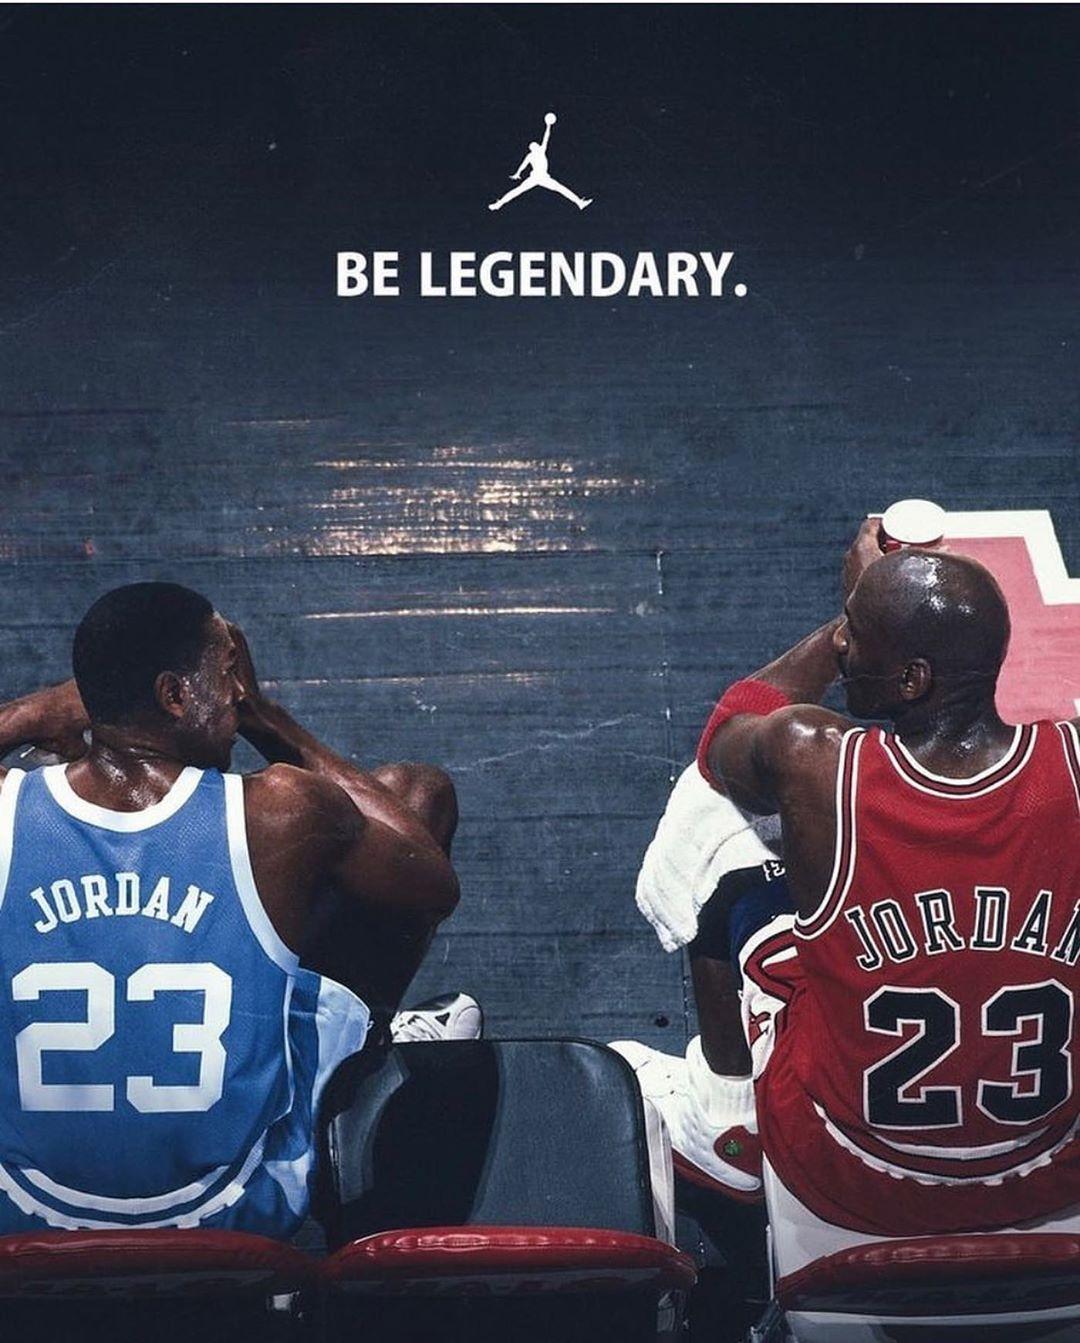 Two Michael Jordan's sitting on the bench with the text 